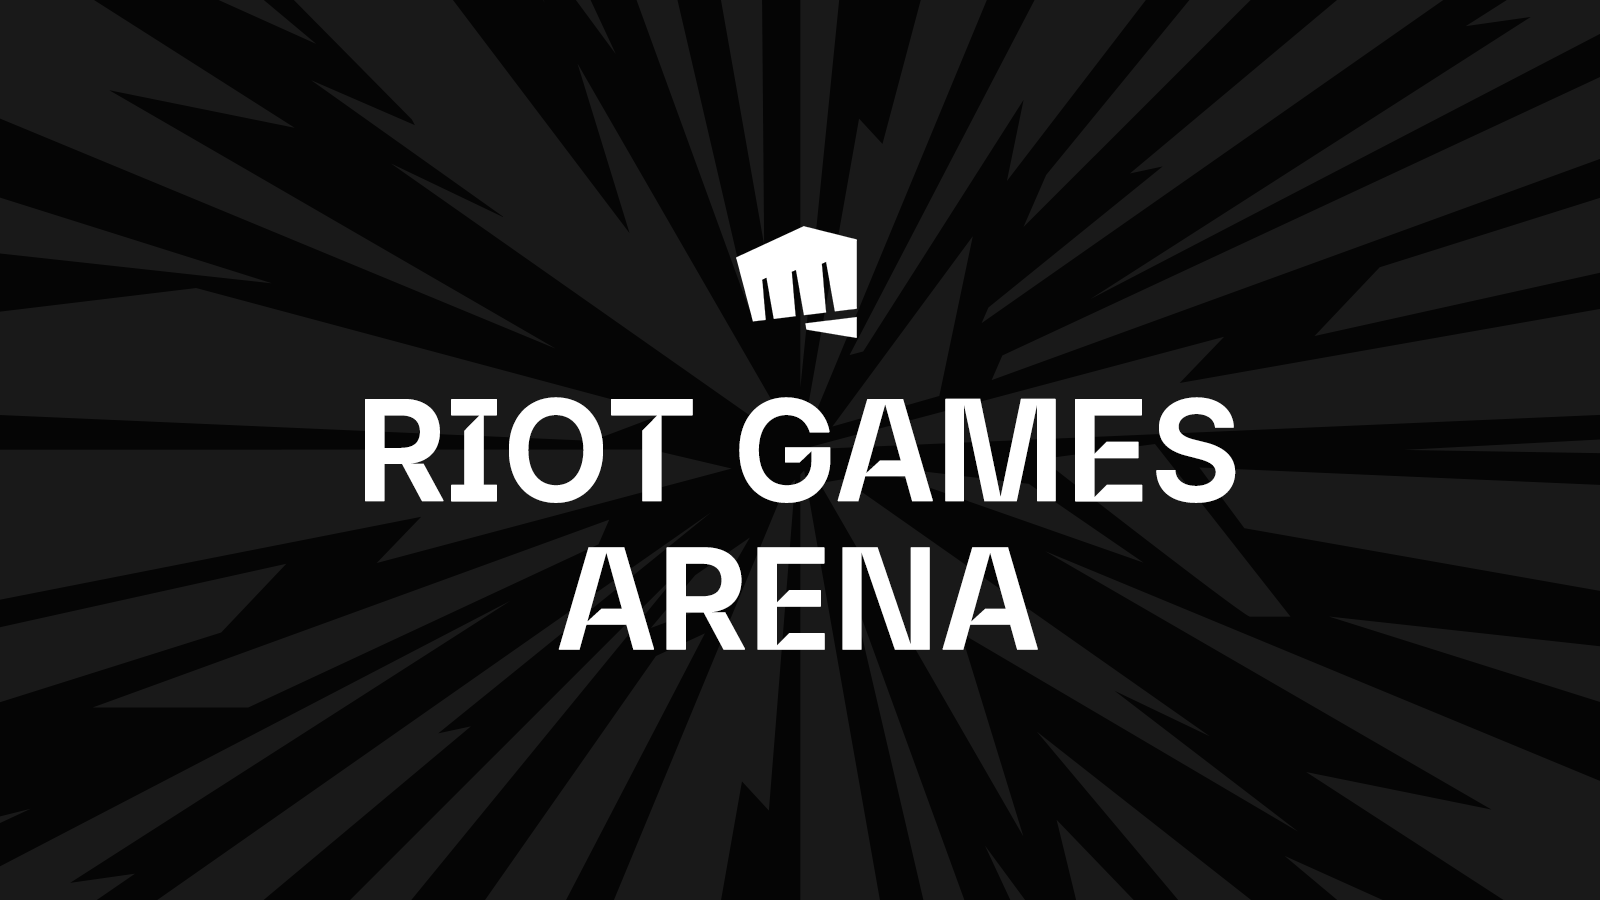 Riot Forge Games - Home